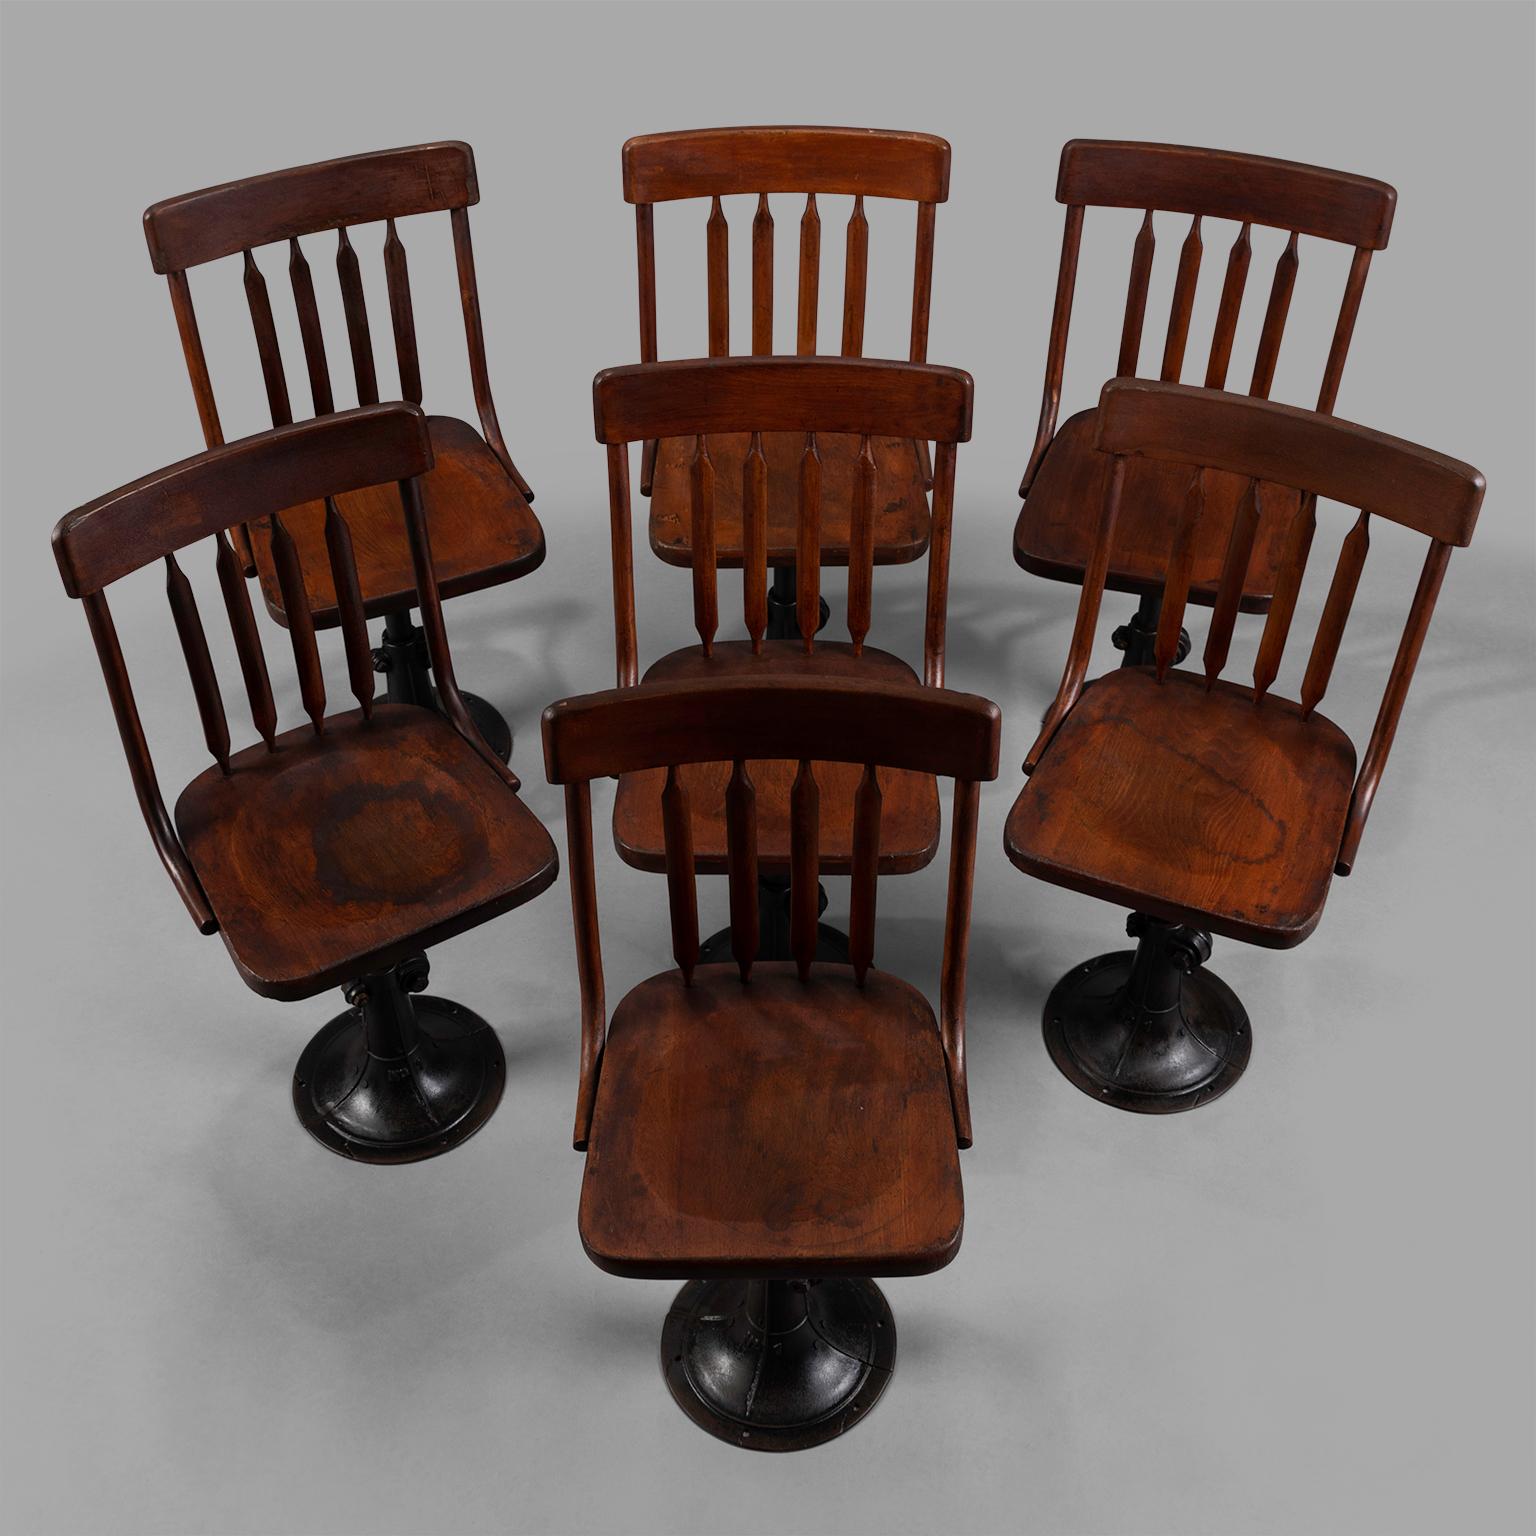 American Seven Cast Iron and Wood Adjustable Height Chairs, circa 1895 For Sale